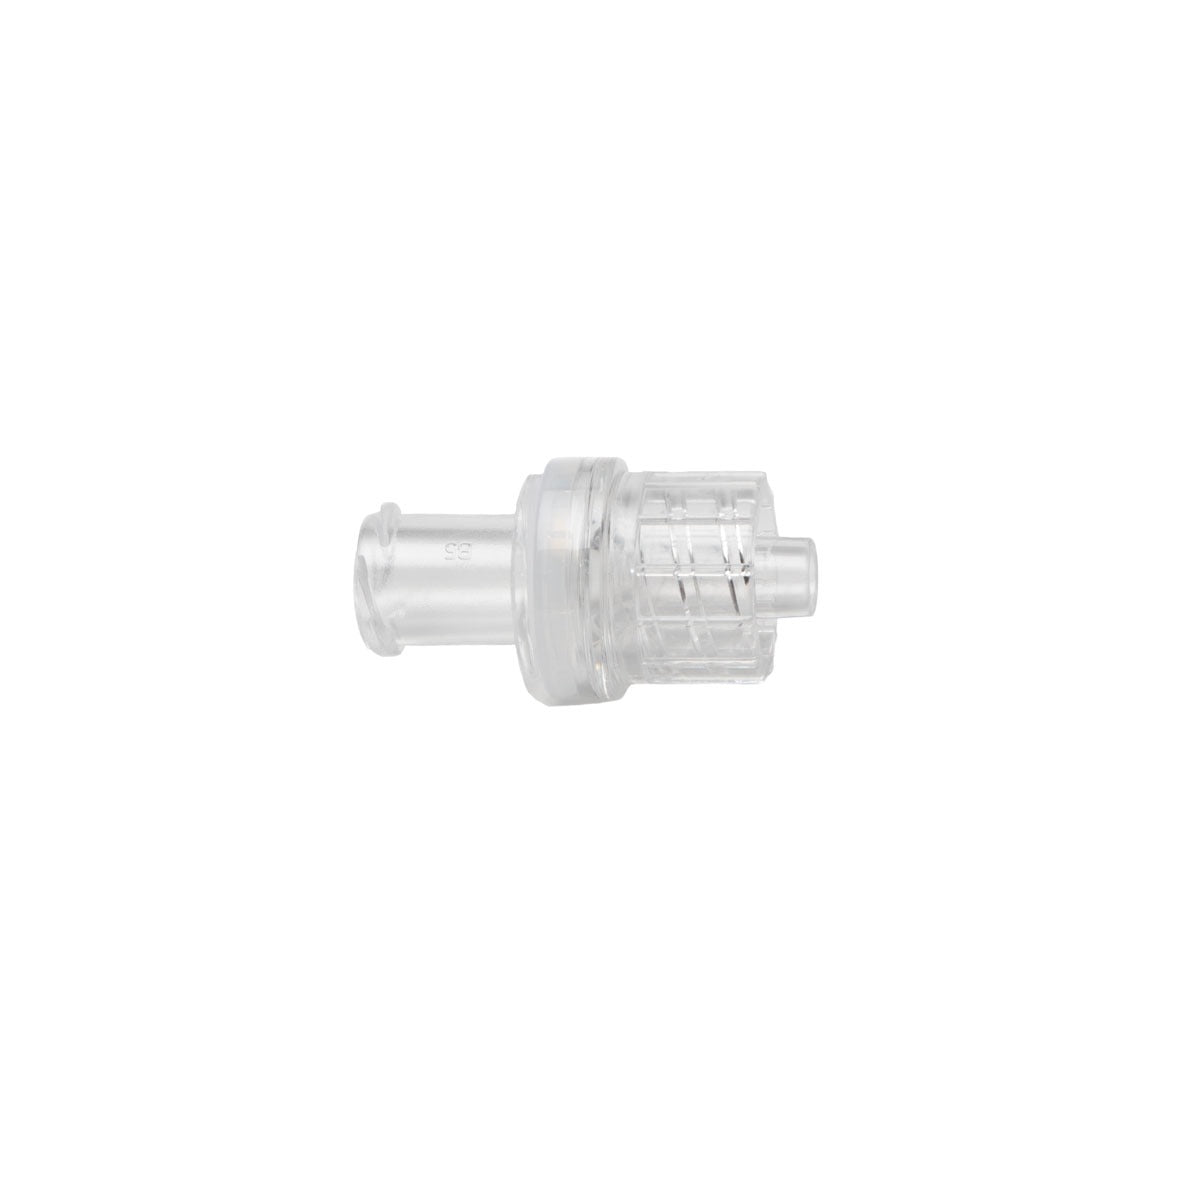 Check Valve, Female Luer Lock Inlet, Male Luer Lock Outlet